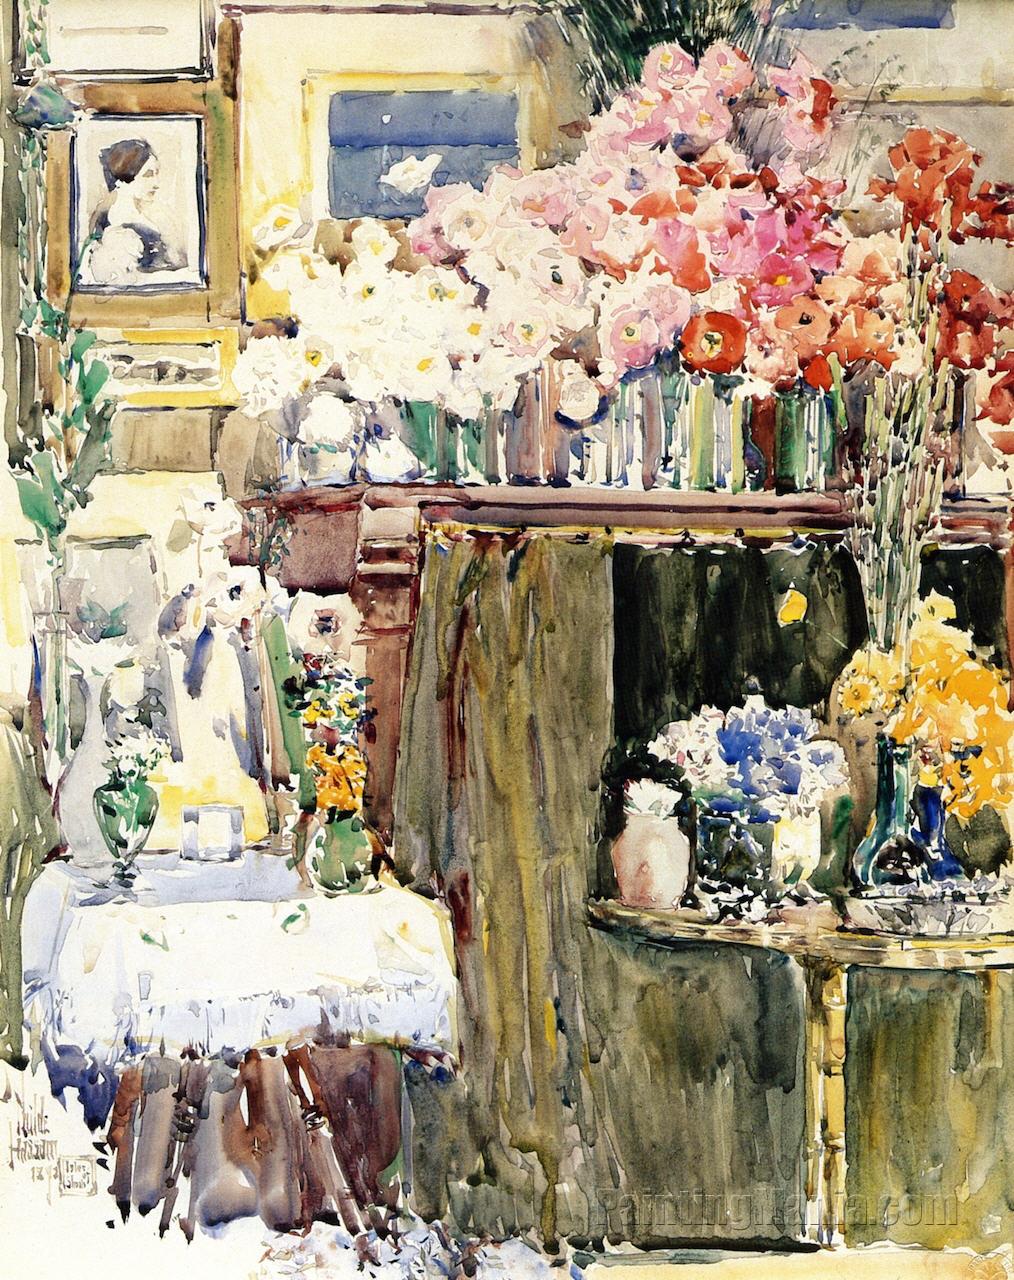 The Altar and the Shrine (Celia Thaxter's Sitting Room, Isles of Shoals)